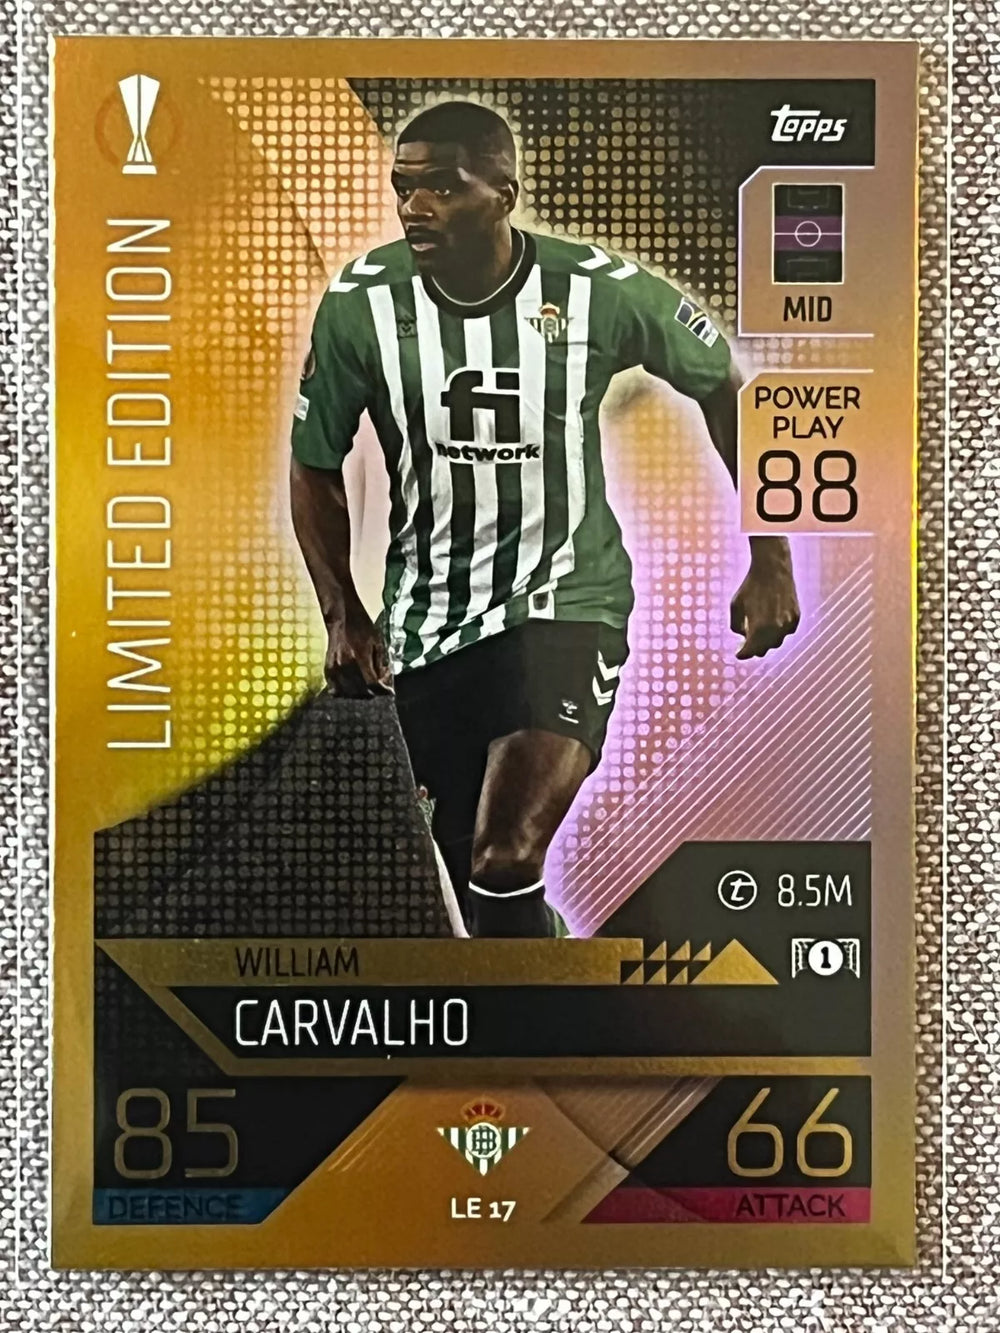 William Carvalho 2022 2023 Topps Match Attax Limited Edition Gold Series Mint Card #LE 17